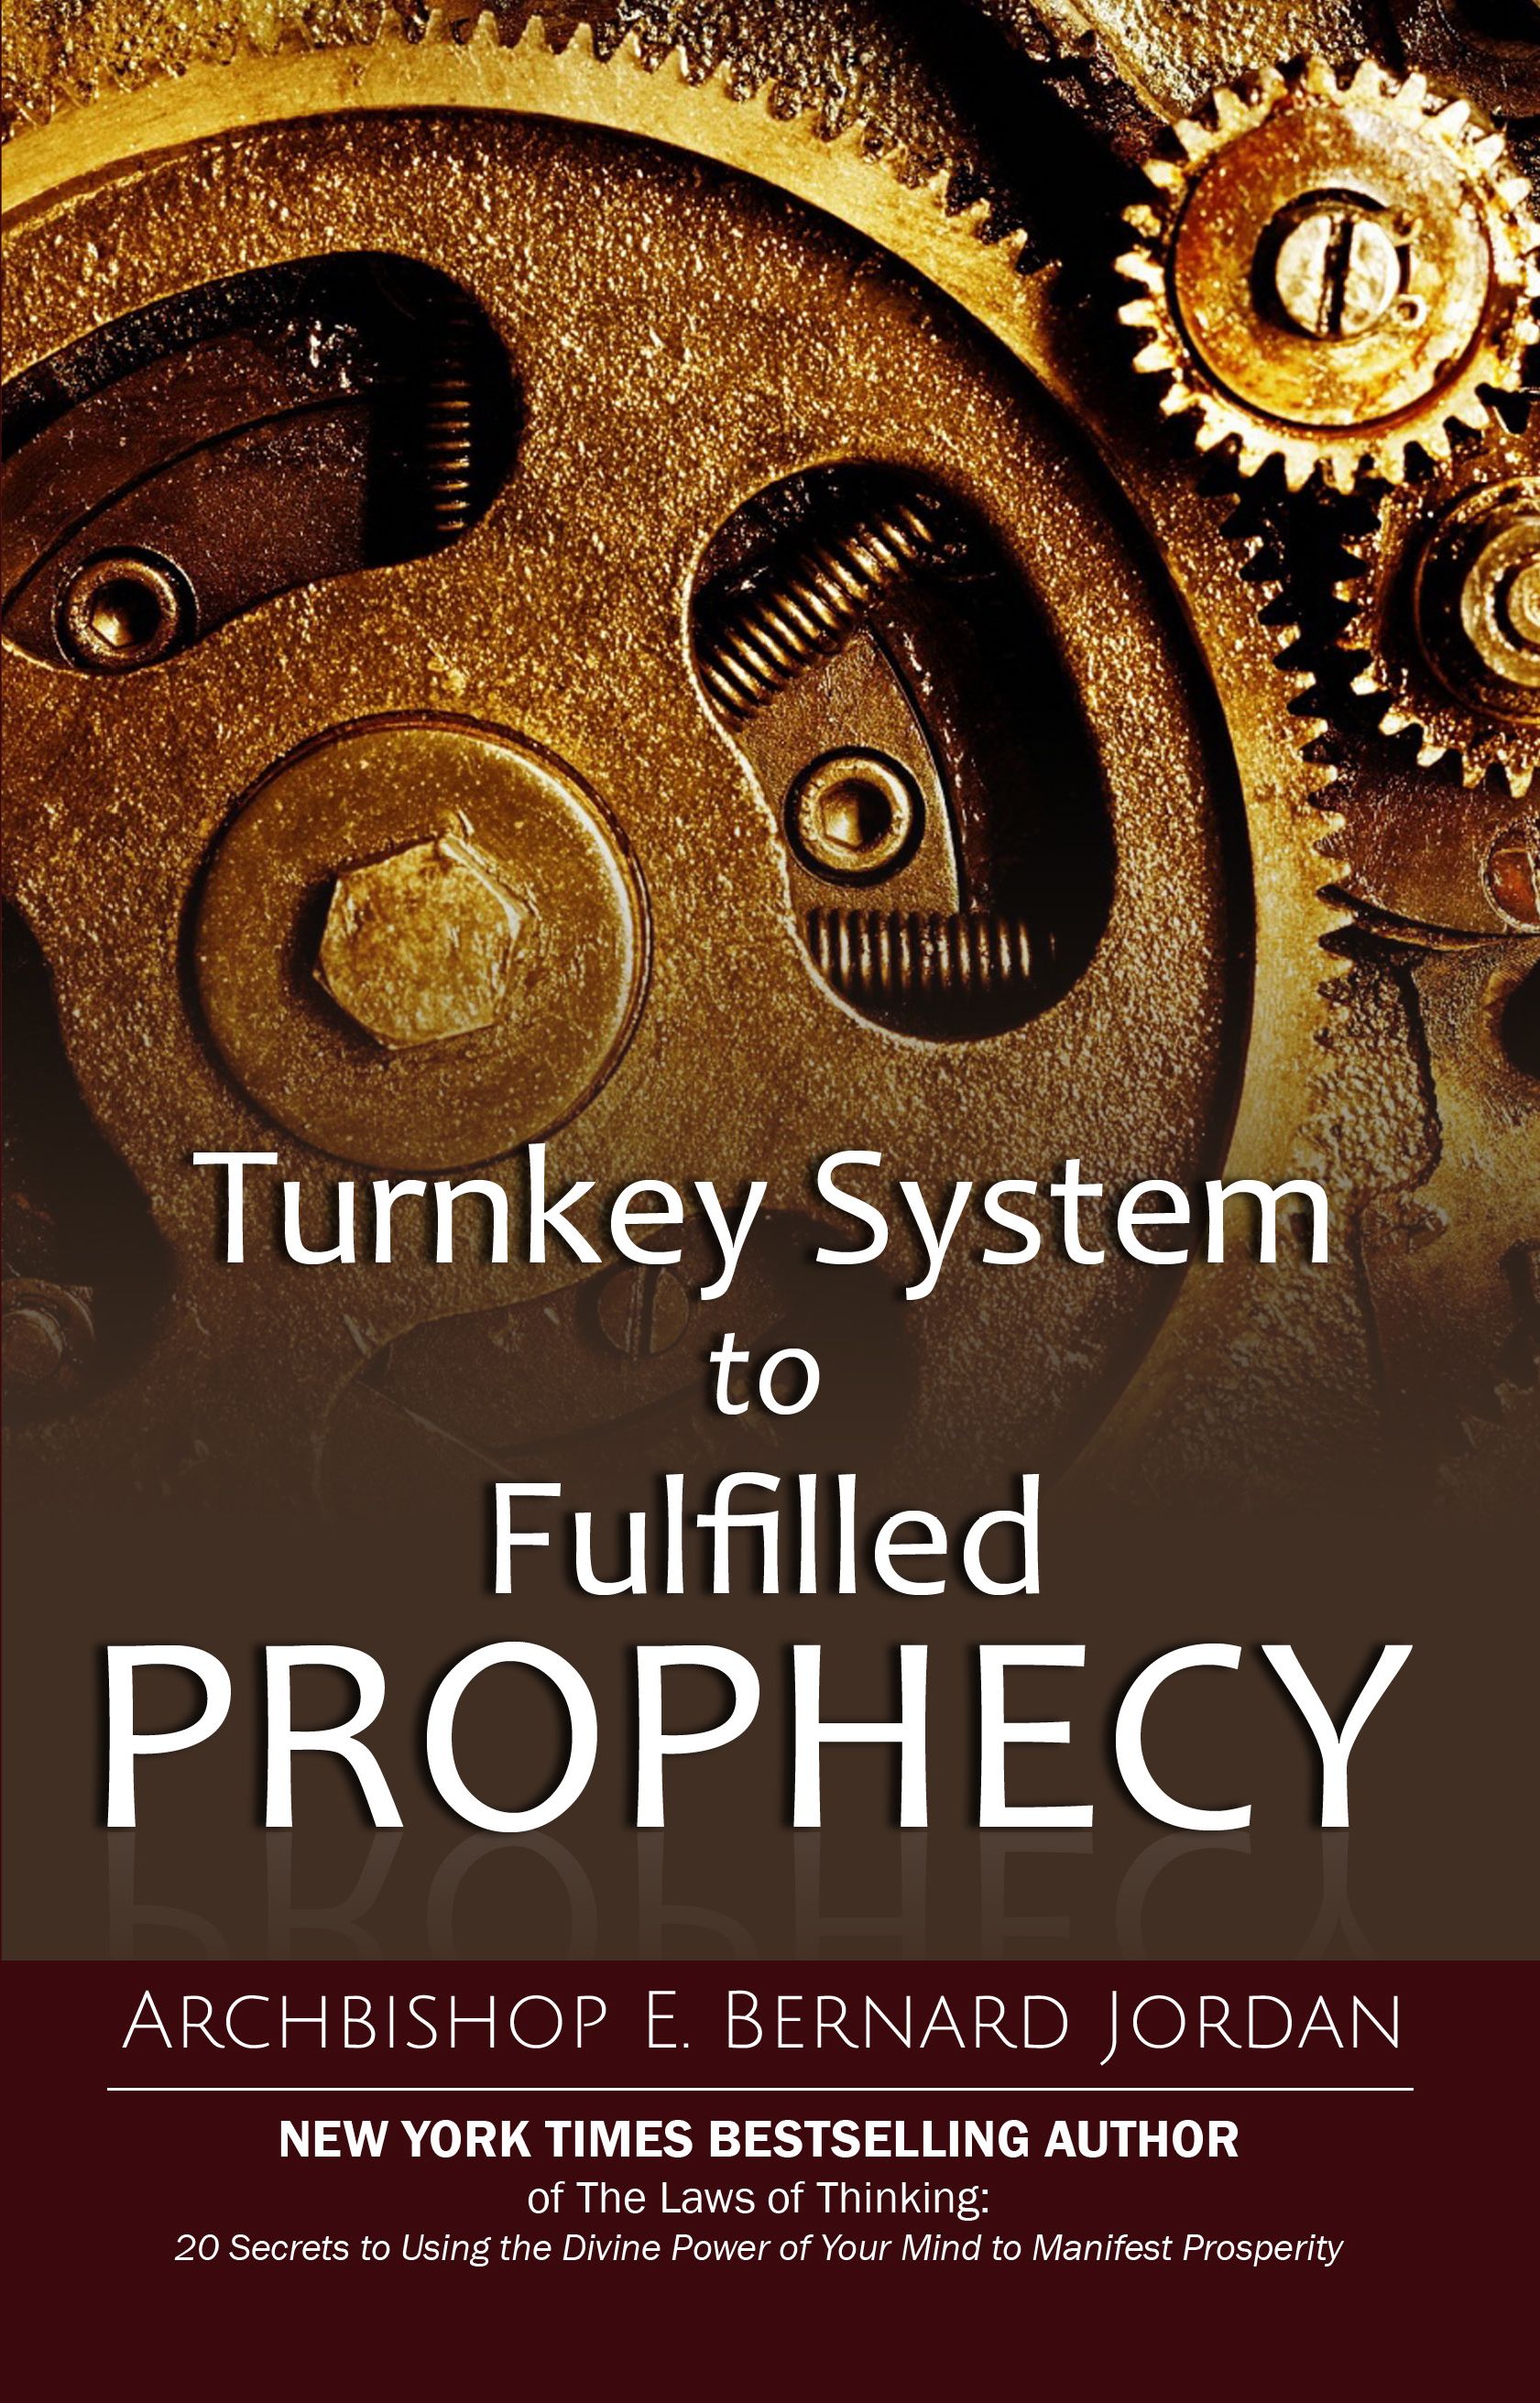 Turnkey System to Fulfilled Prophecy